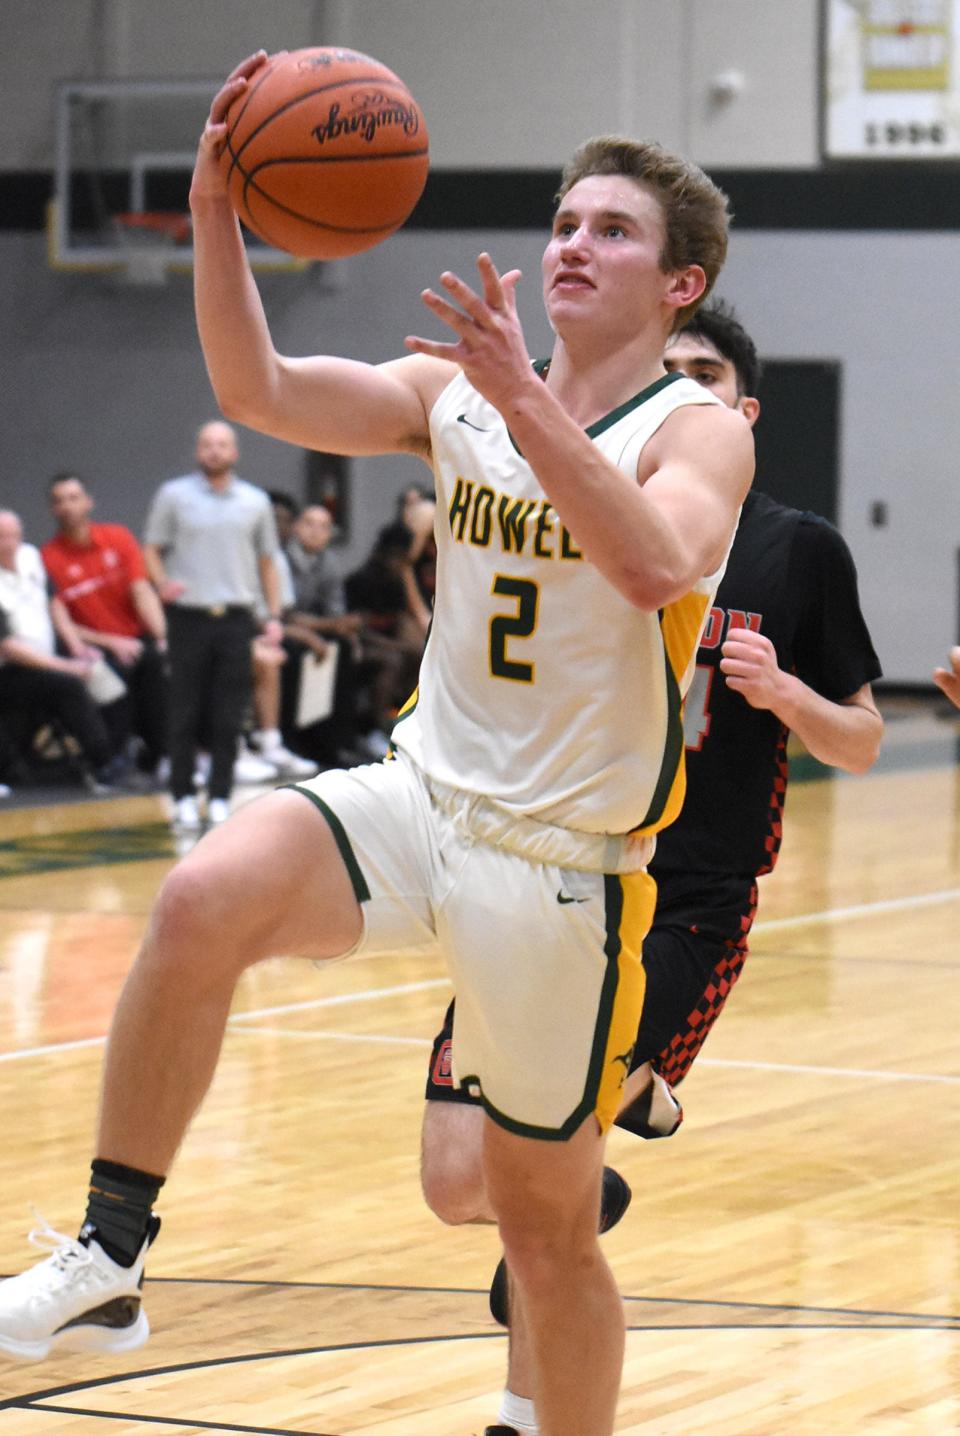 Howell's Arik Pietila scored 14 points in a 53-44 victory over Canton on Tuesday, Jan. 31, 2023.